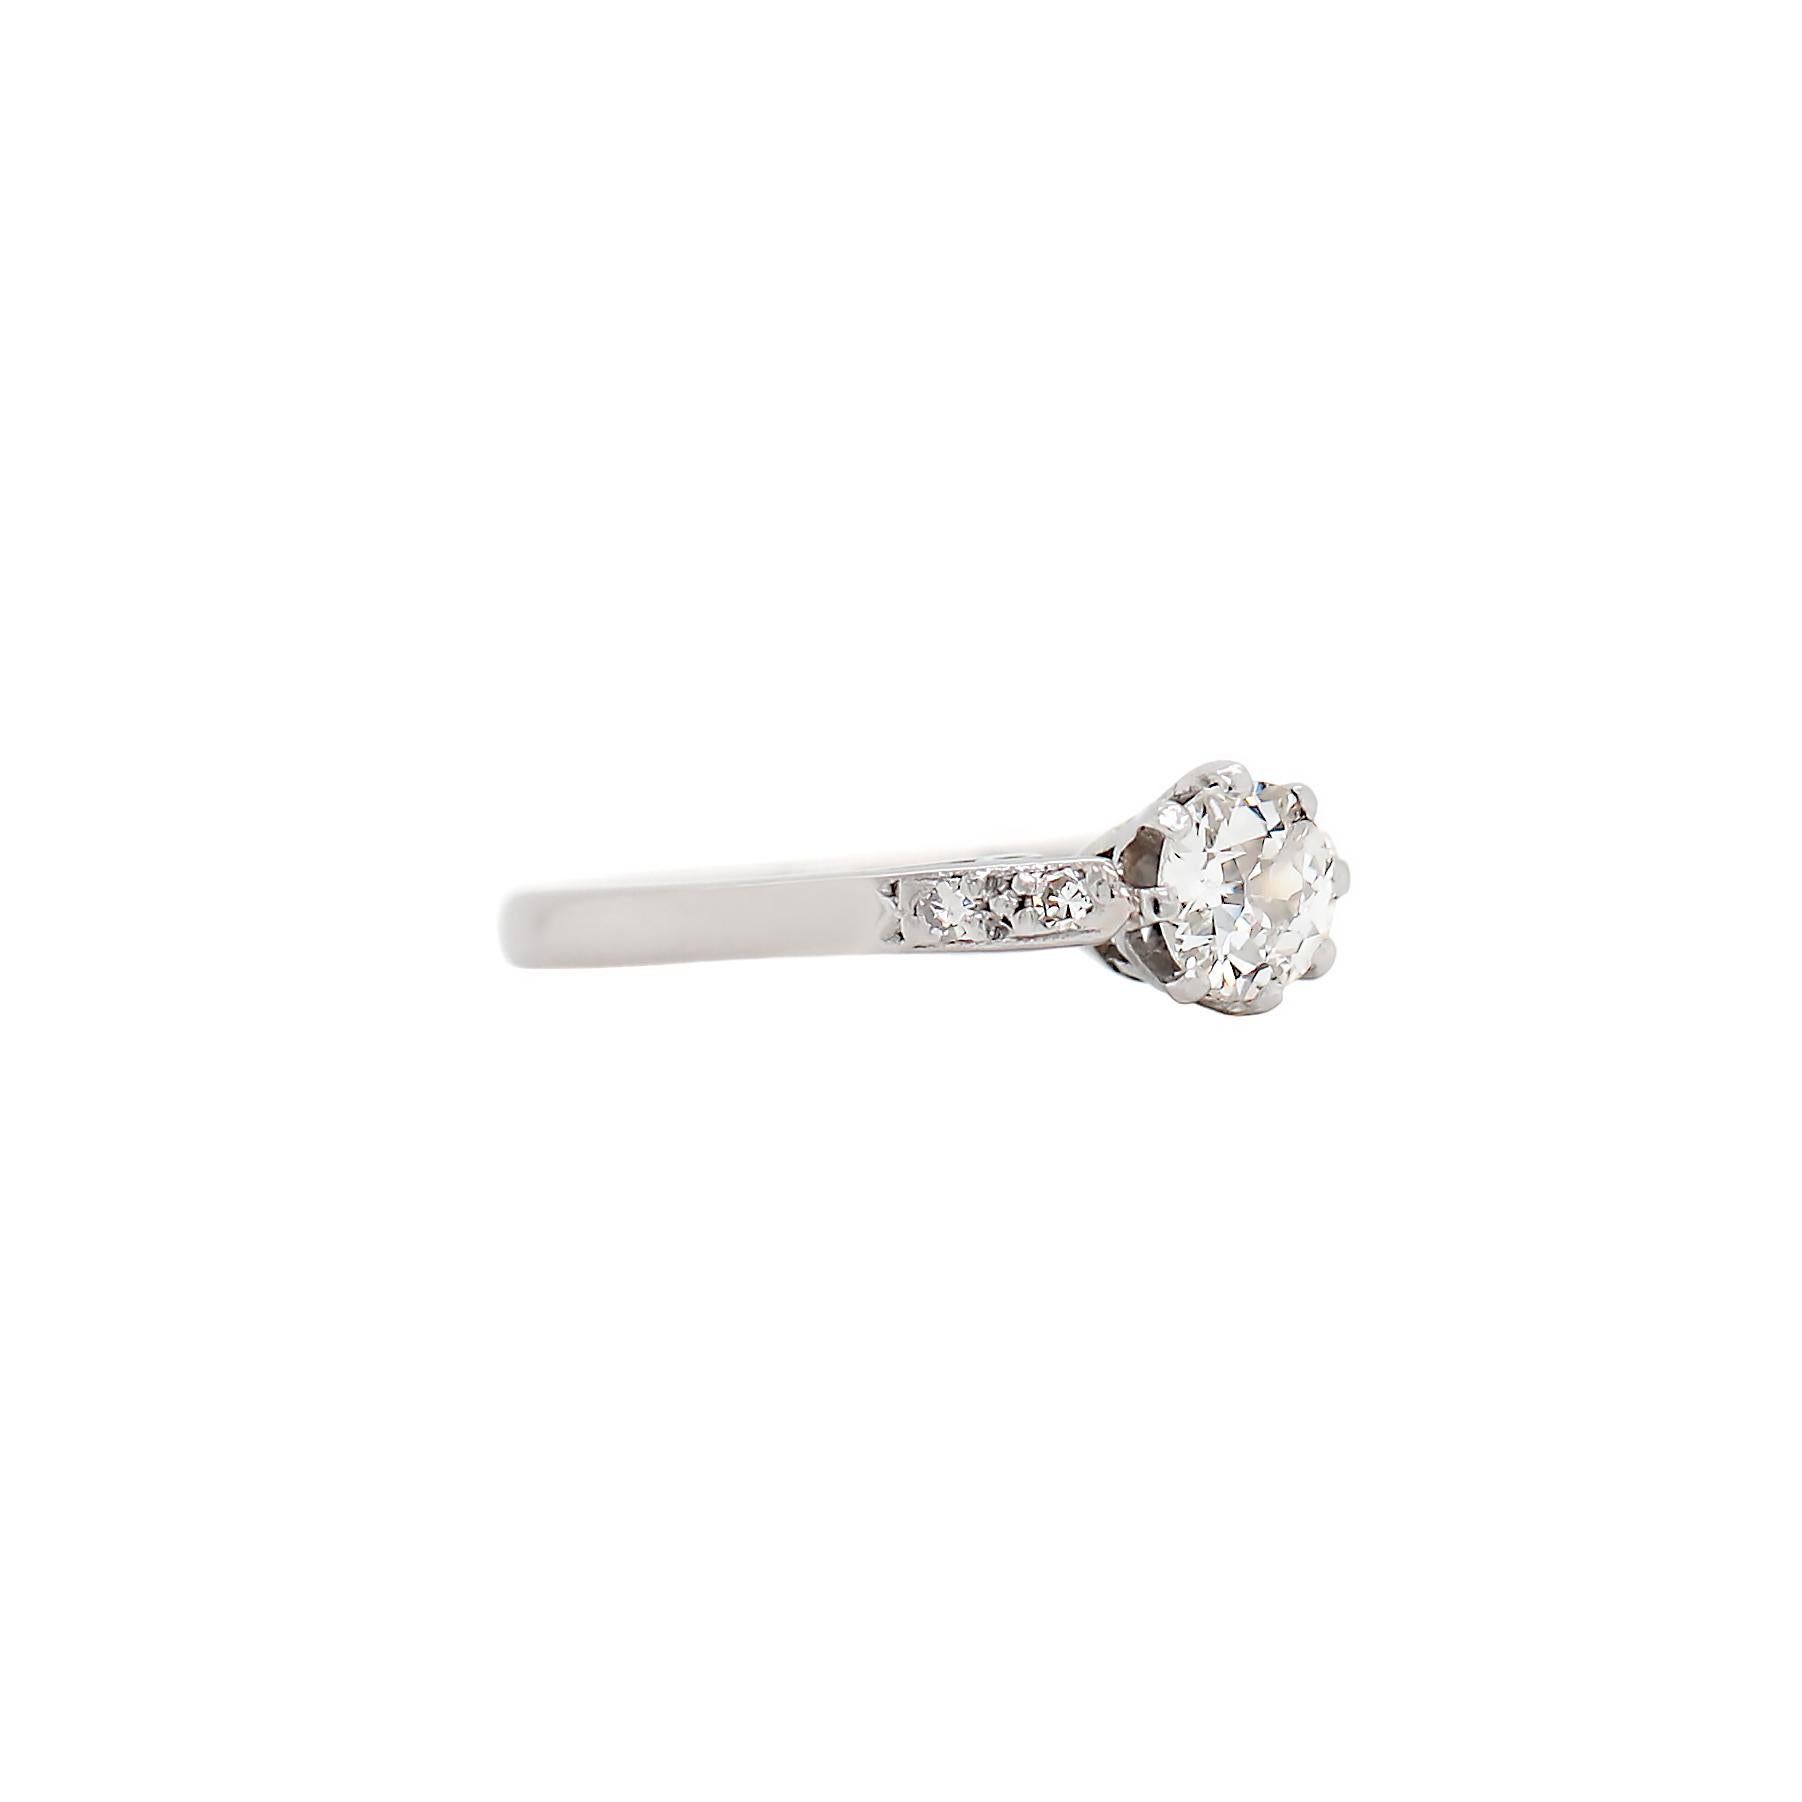 This beautiful Edwardian engagement ring features a 0.40ct old cut diamond mounted in an eight claw open back setting, accompanied by two eight cut diamonds grain set on either shoulder with an approximate total weight of 0.04ct. Stamped 18CT PLAT.